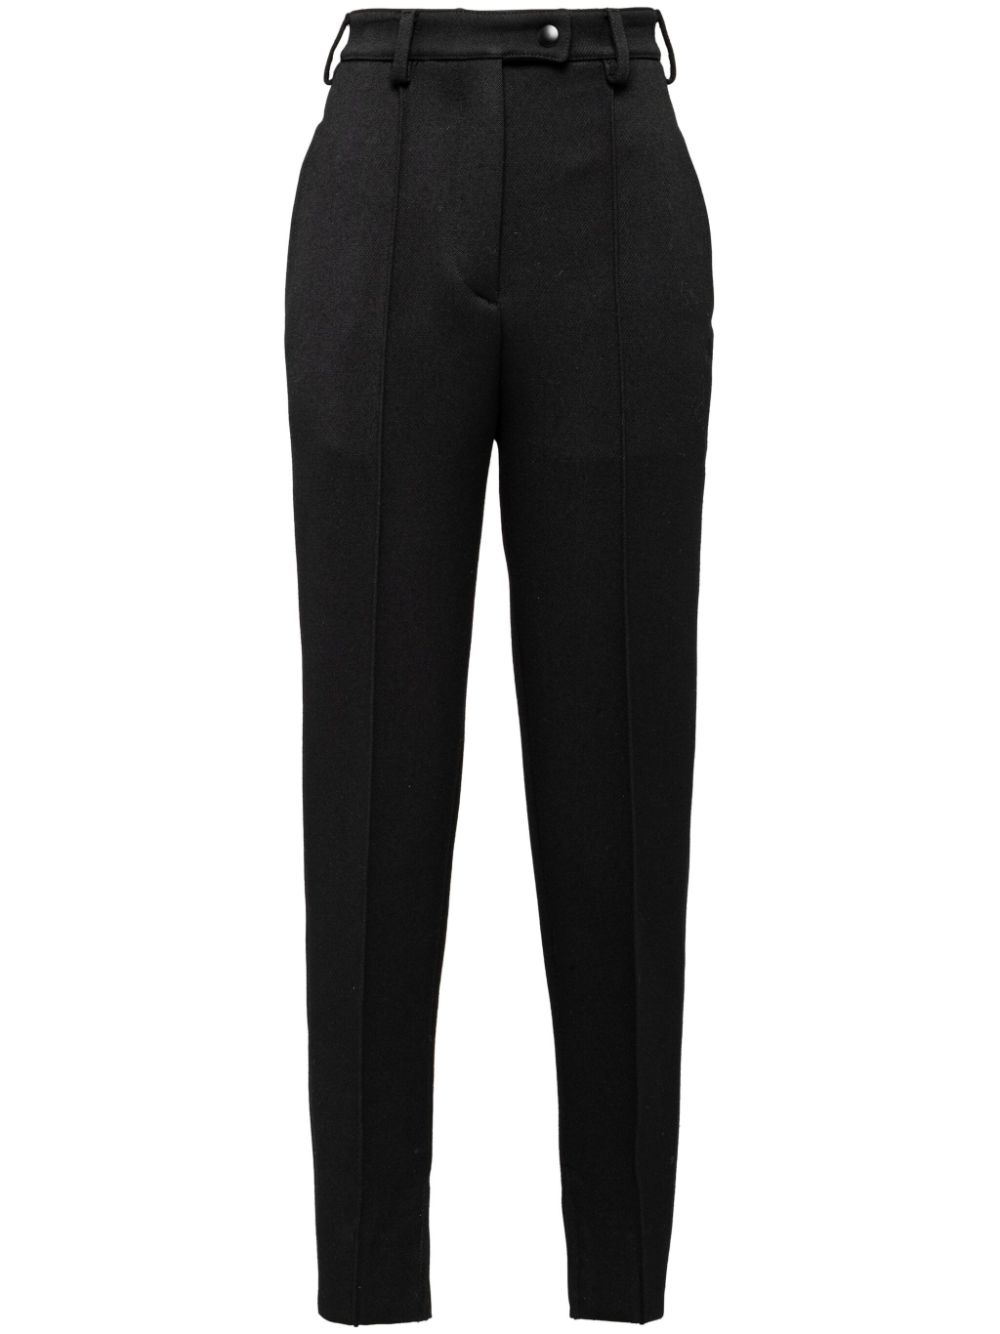 Luxury trousers for women - Dolce & Gabbana white trousers with silver  buttons